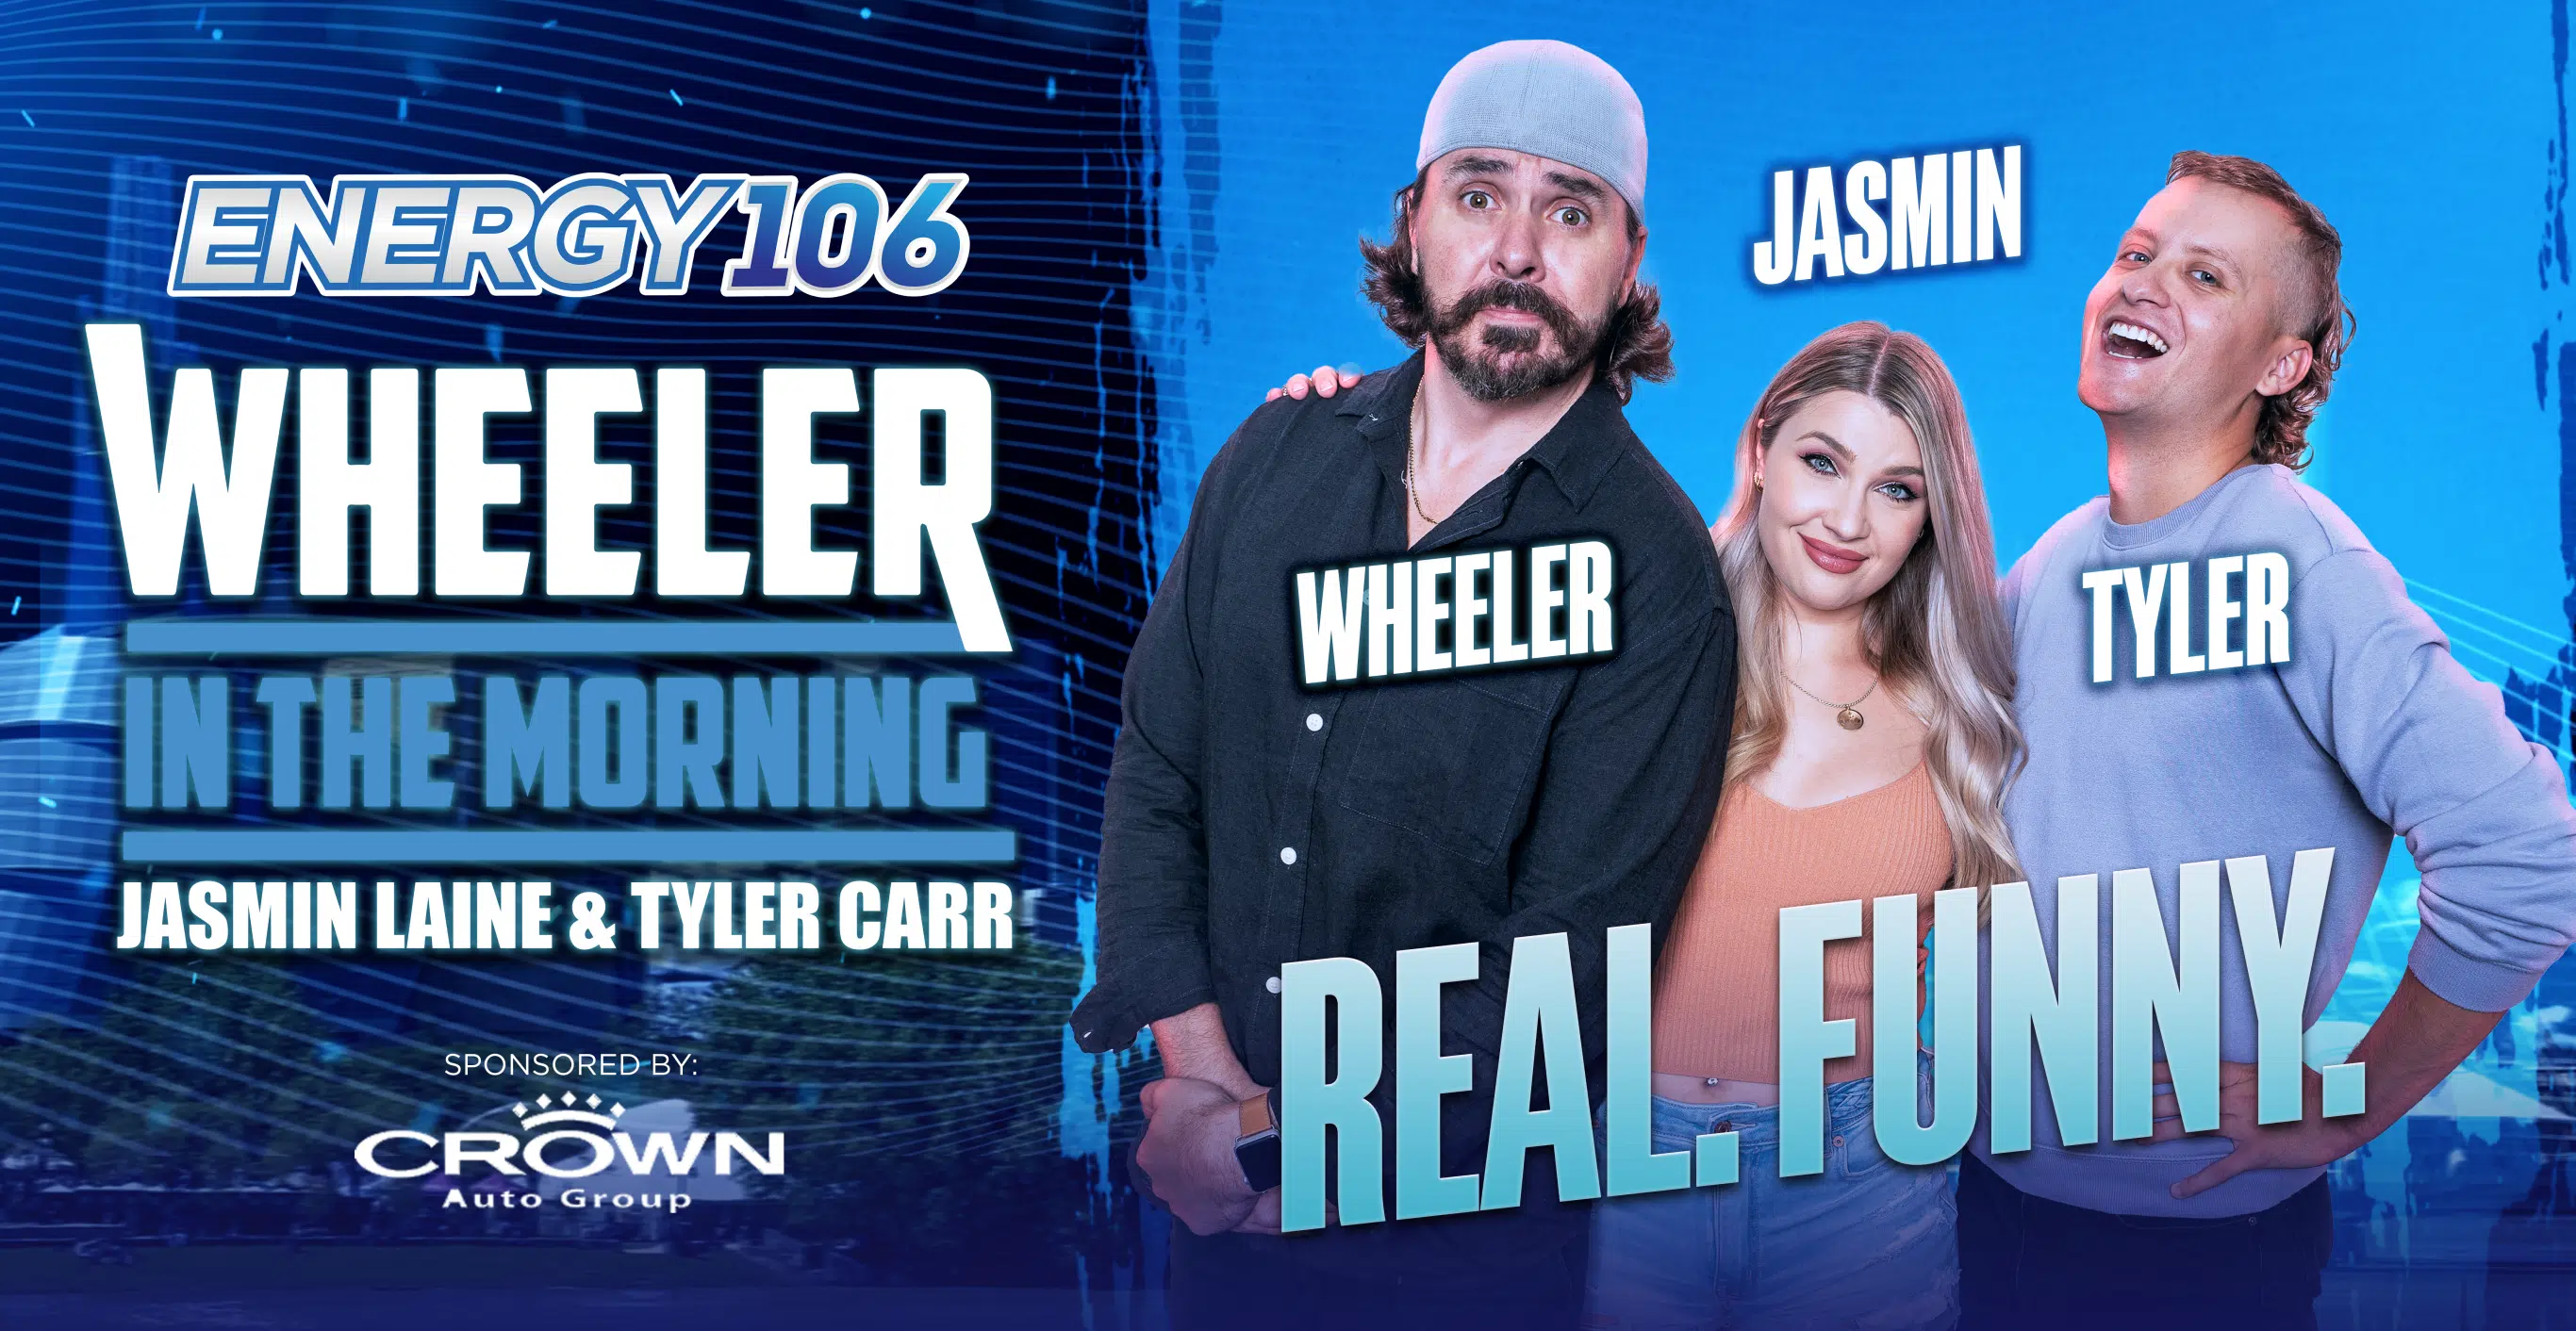 Feature: https://www.energy106.ca/wheeler-in-the-morning-with-jasmin-laine-tyler-carr/